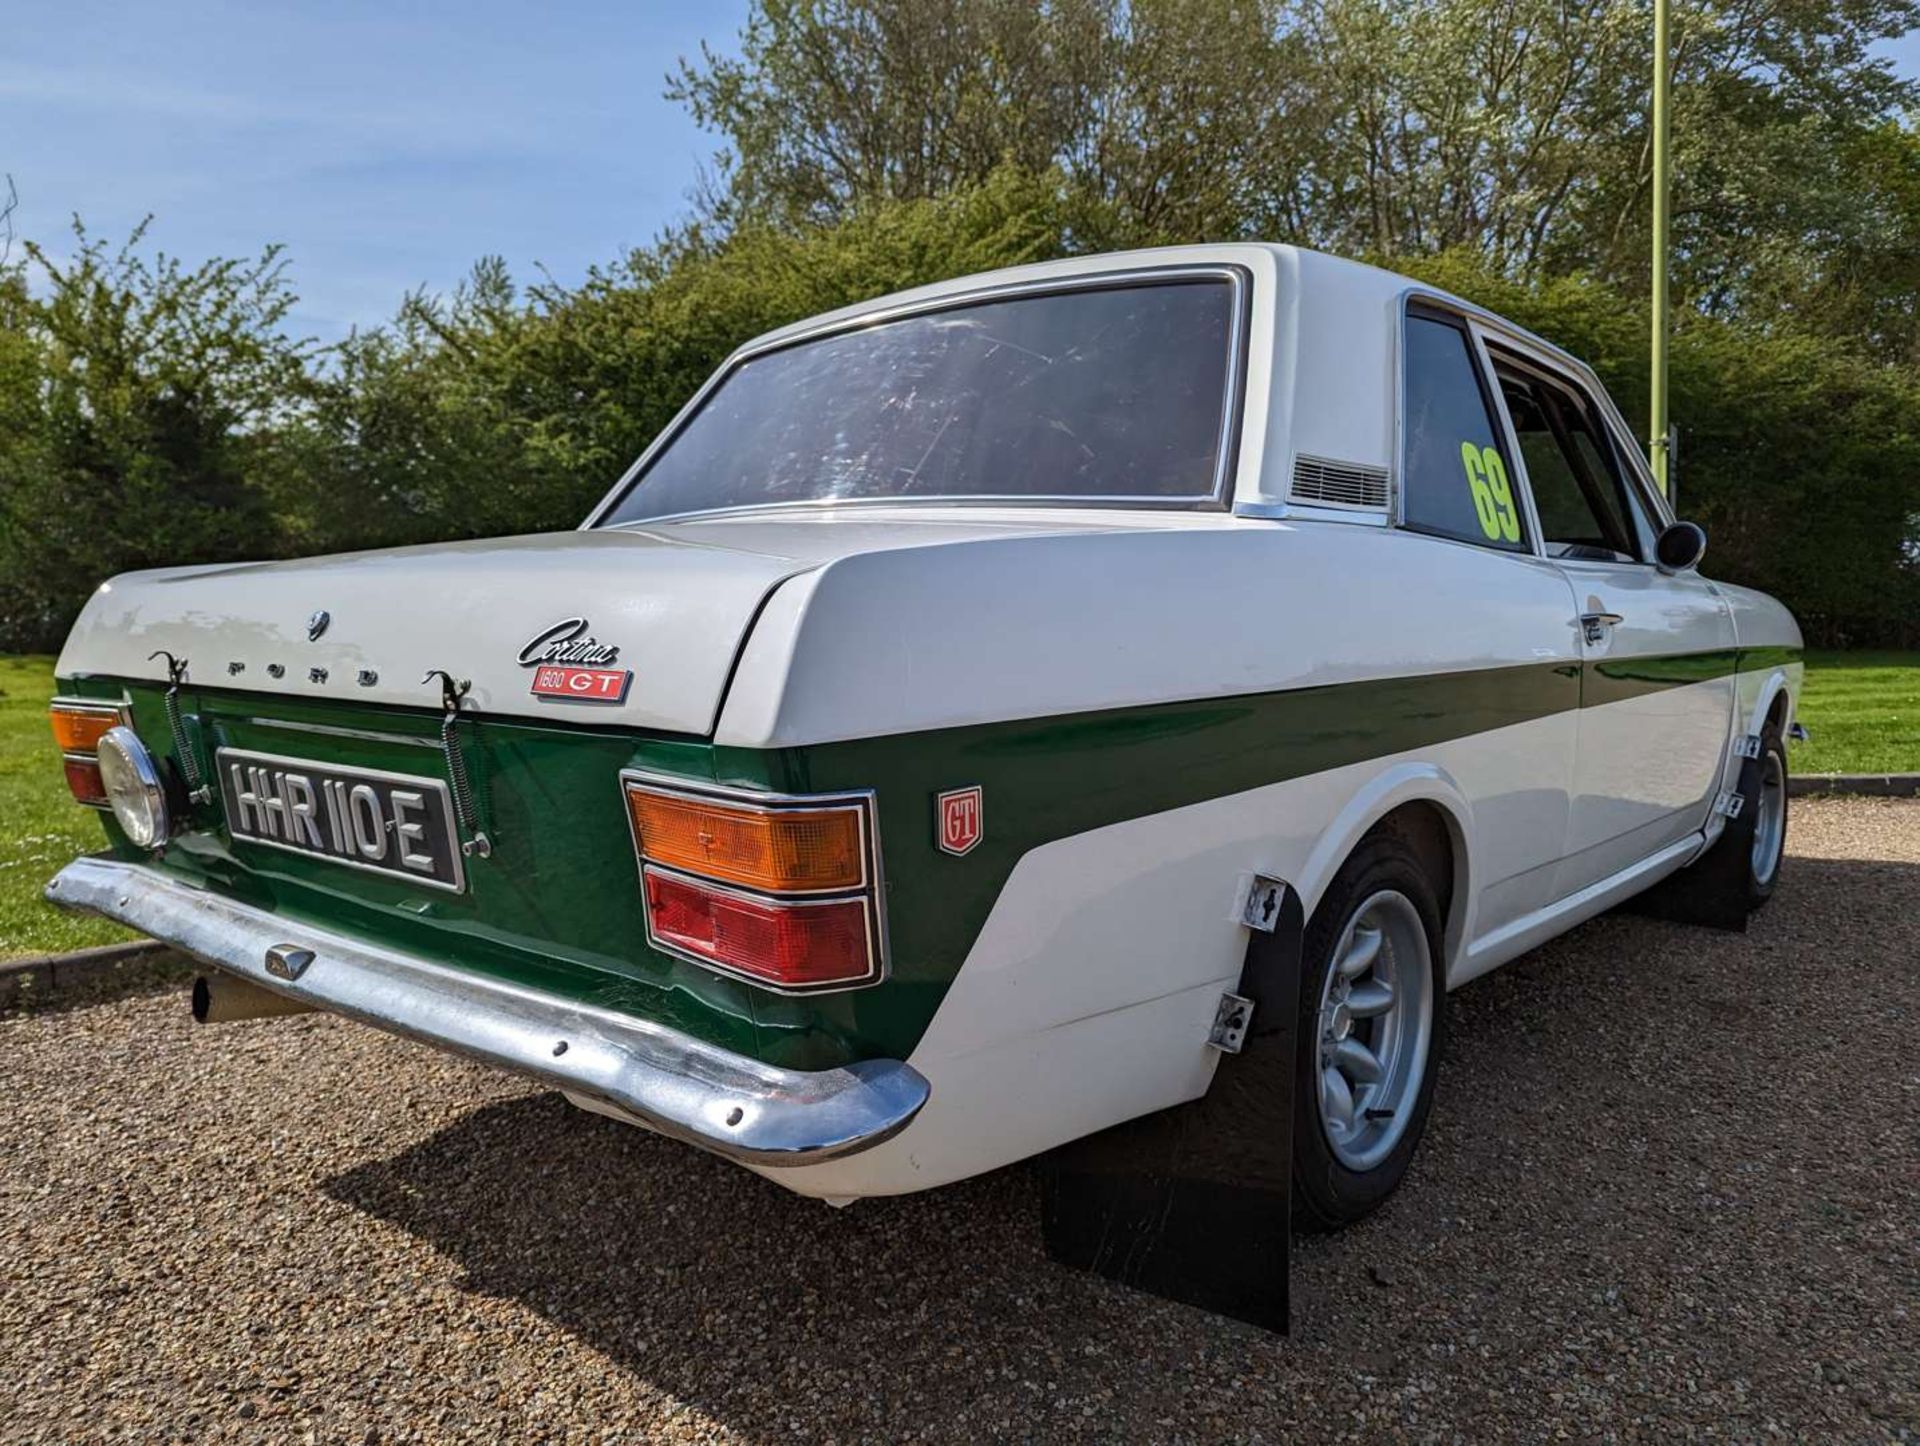 1967 FORD CORTINA MKII&nbsp; - Image 10 of 30